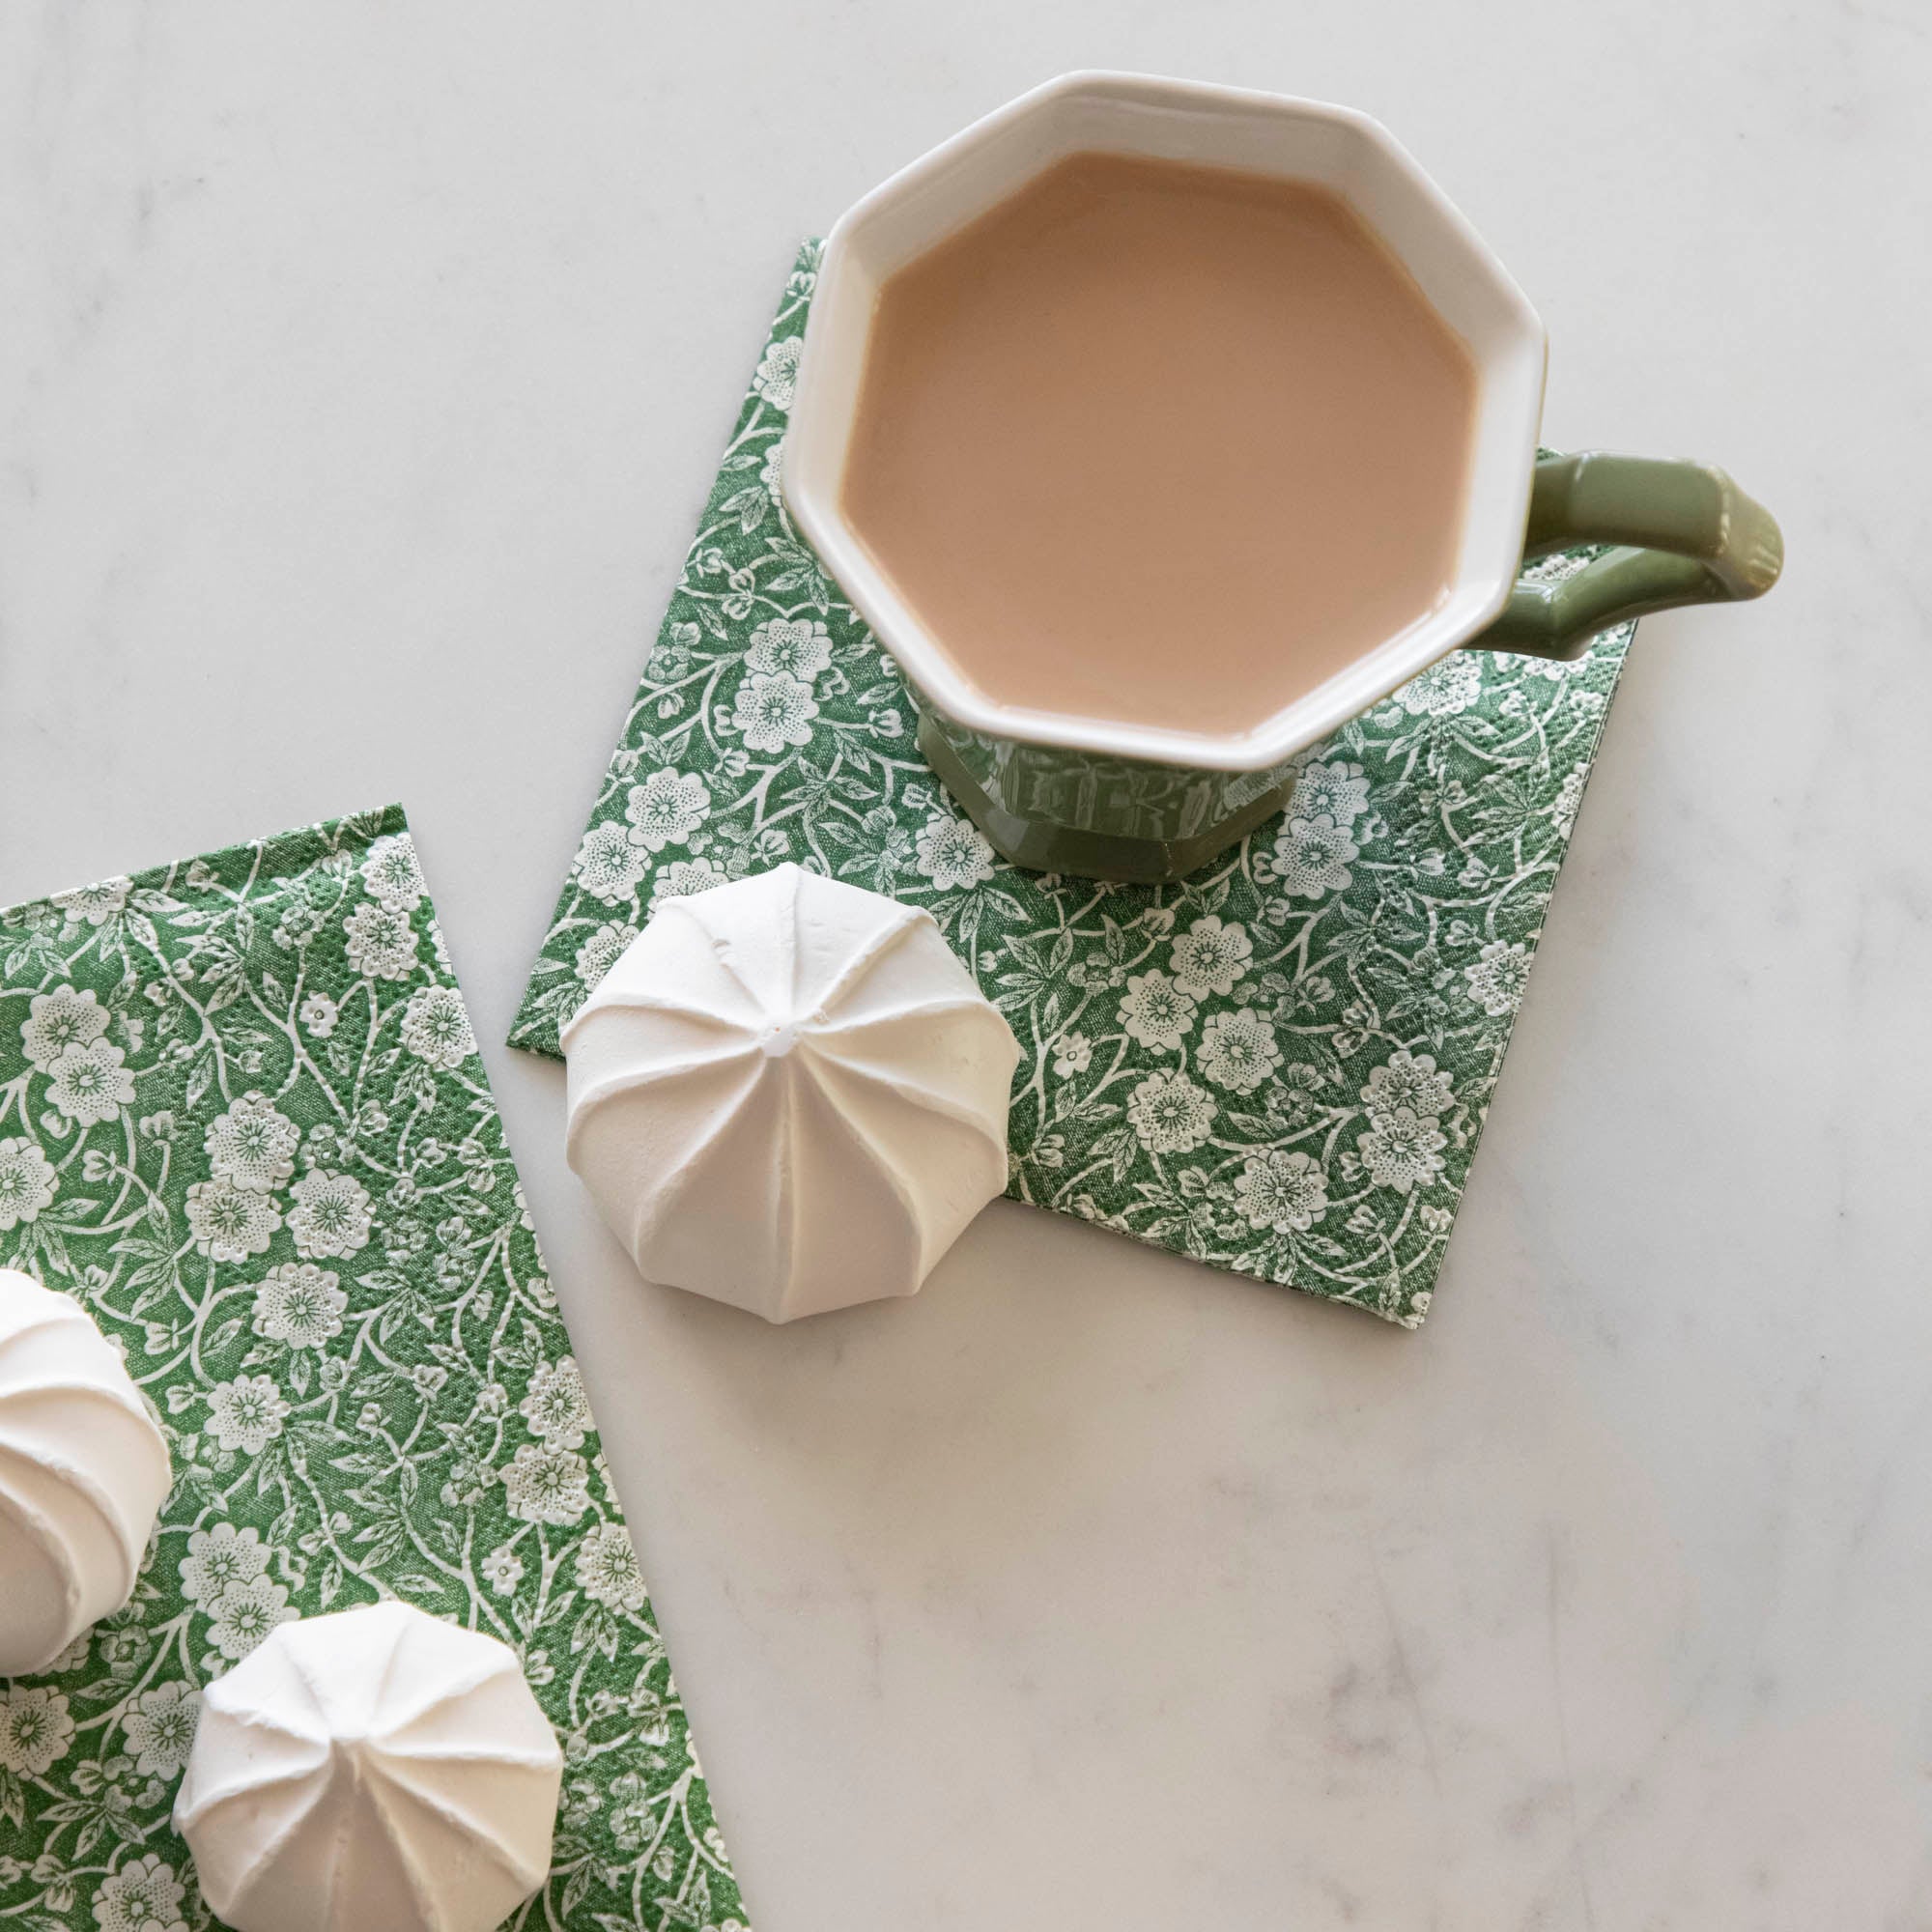 A cup of tea on a Green Calico Napkin from Hester &amp; Cook, creating a serene table setting.